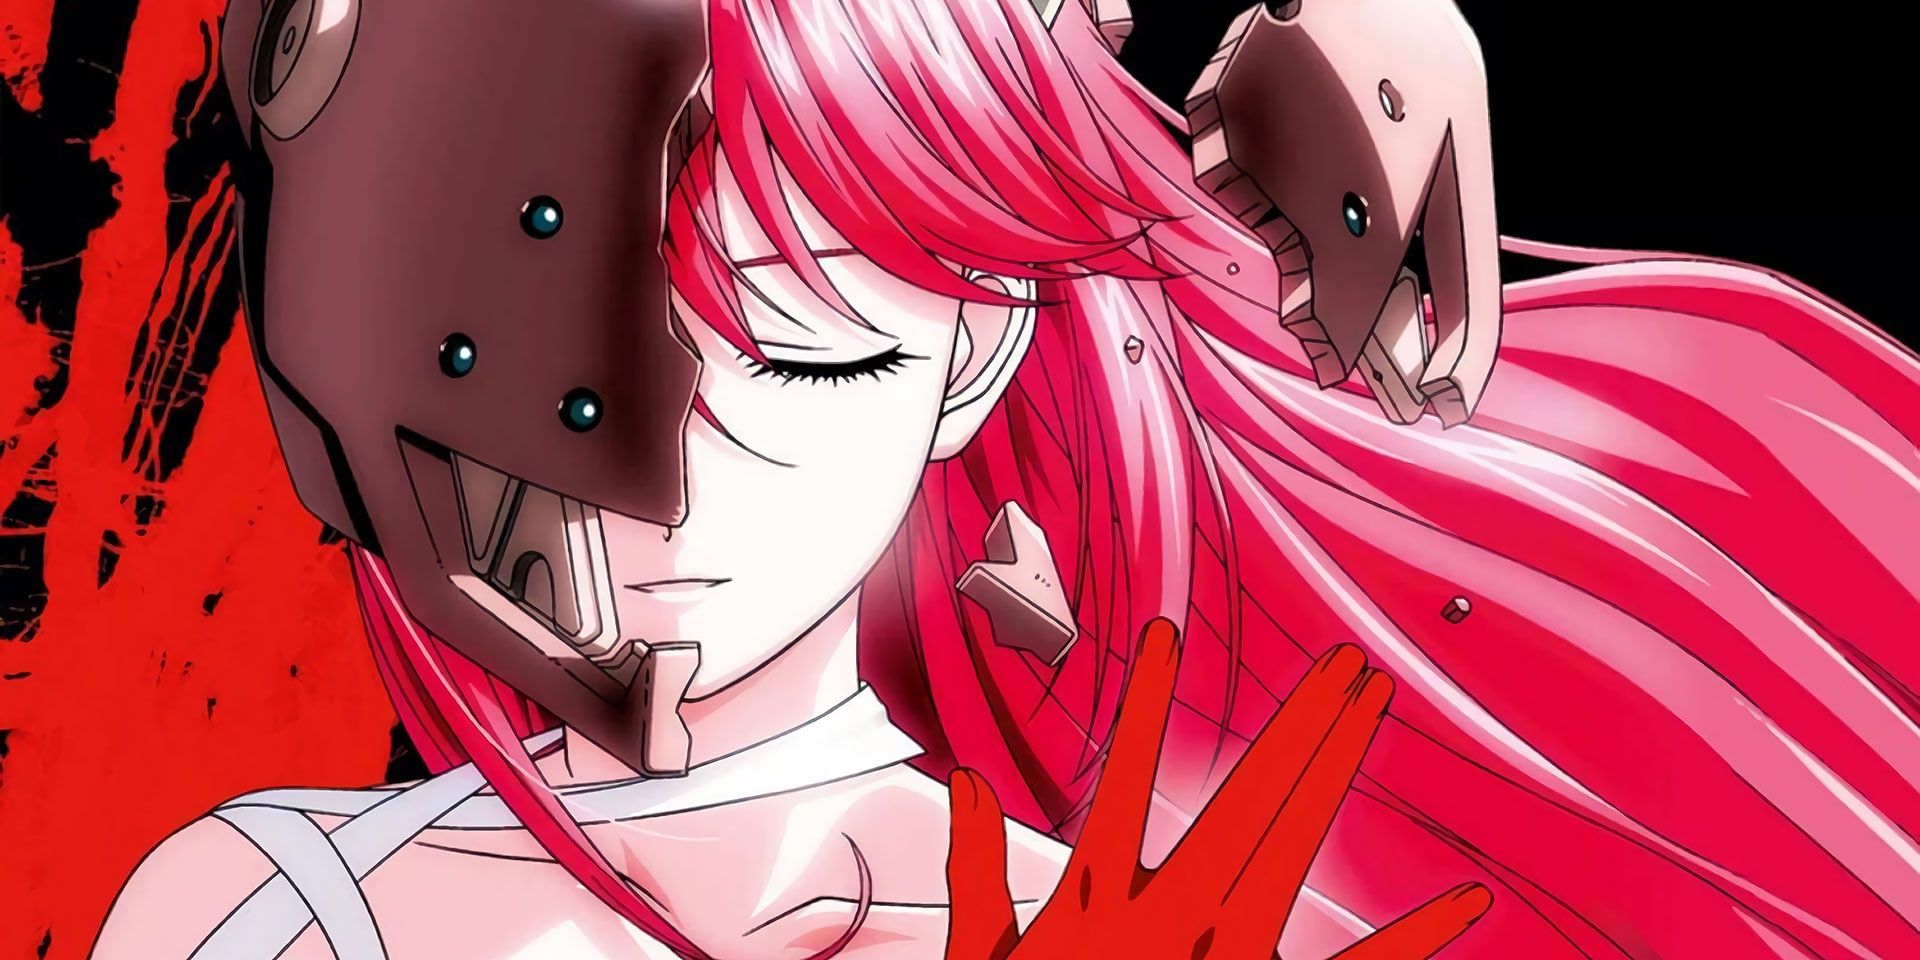 Elfen Lied anime, image of Lucy wearing a borken helmet and blood on her hand